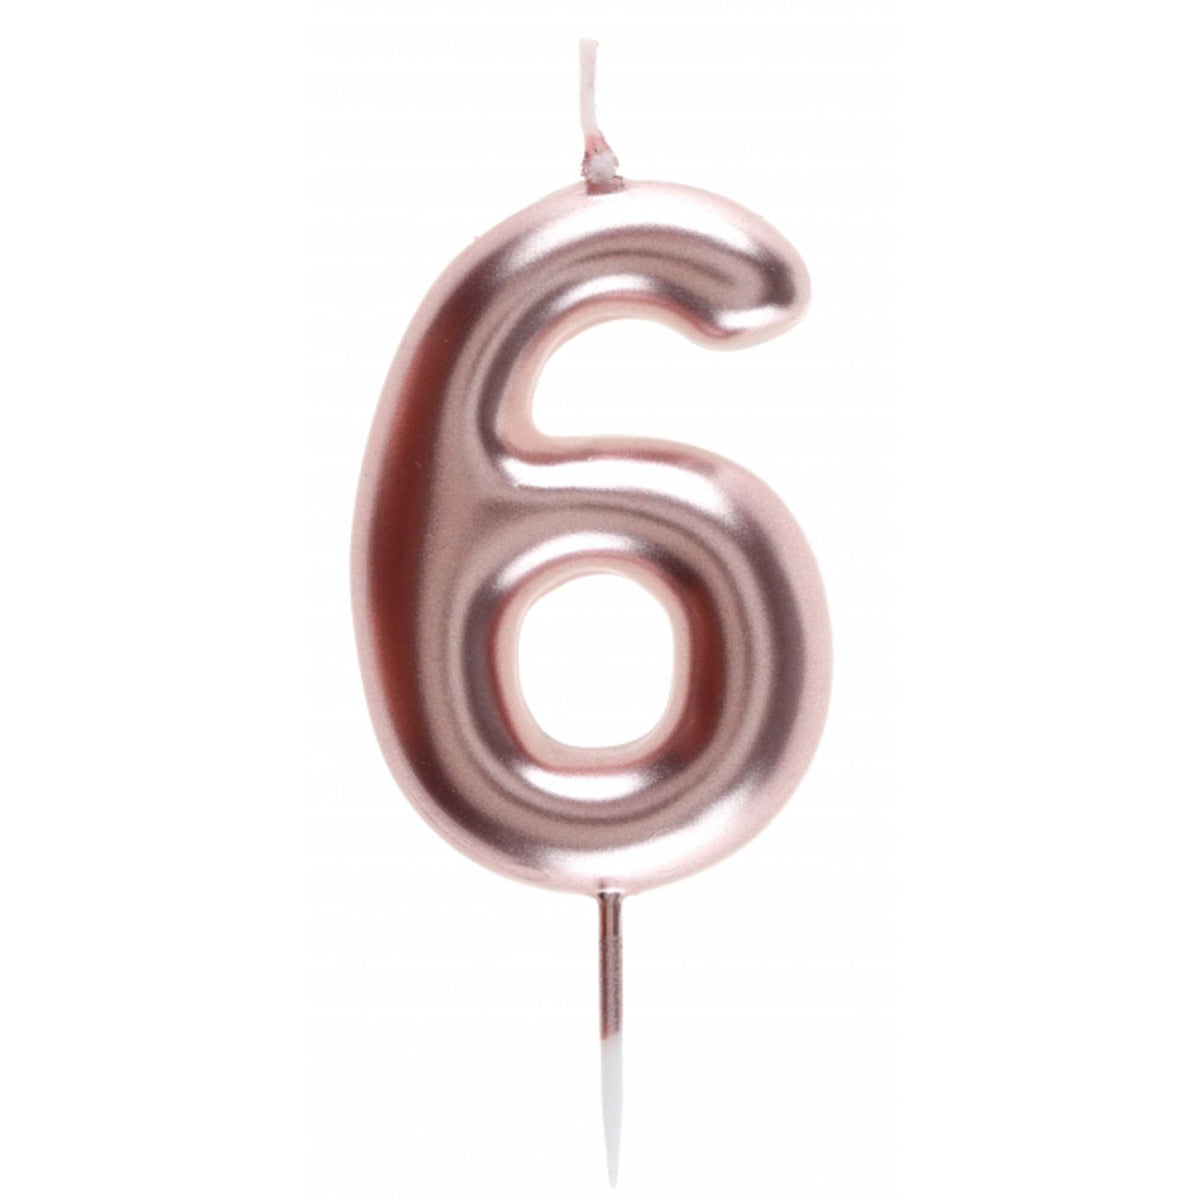 SANTEX Cake Supplies Rose Gold Number 6 Birthday Candle, 1 Count 3660380068839